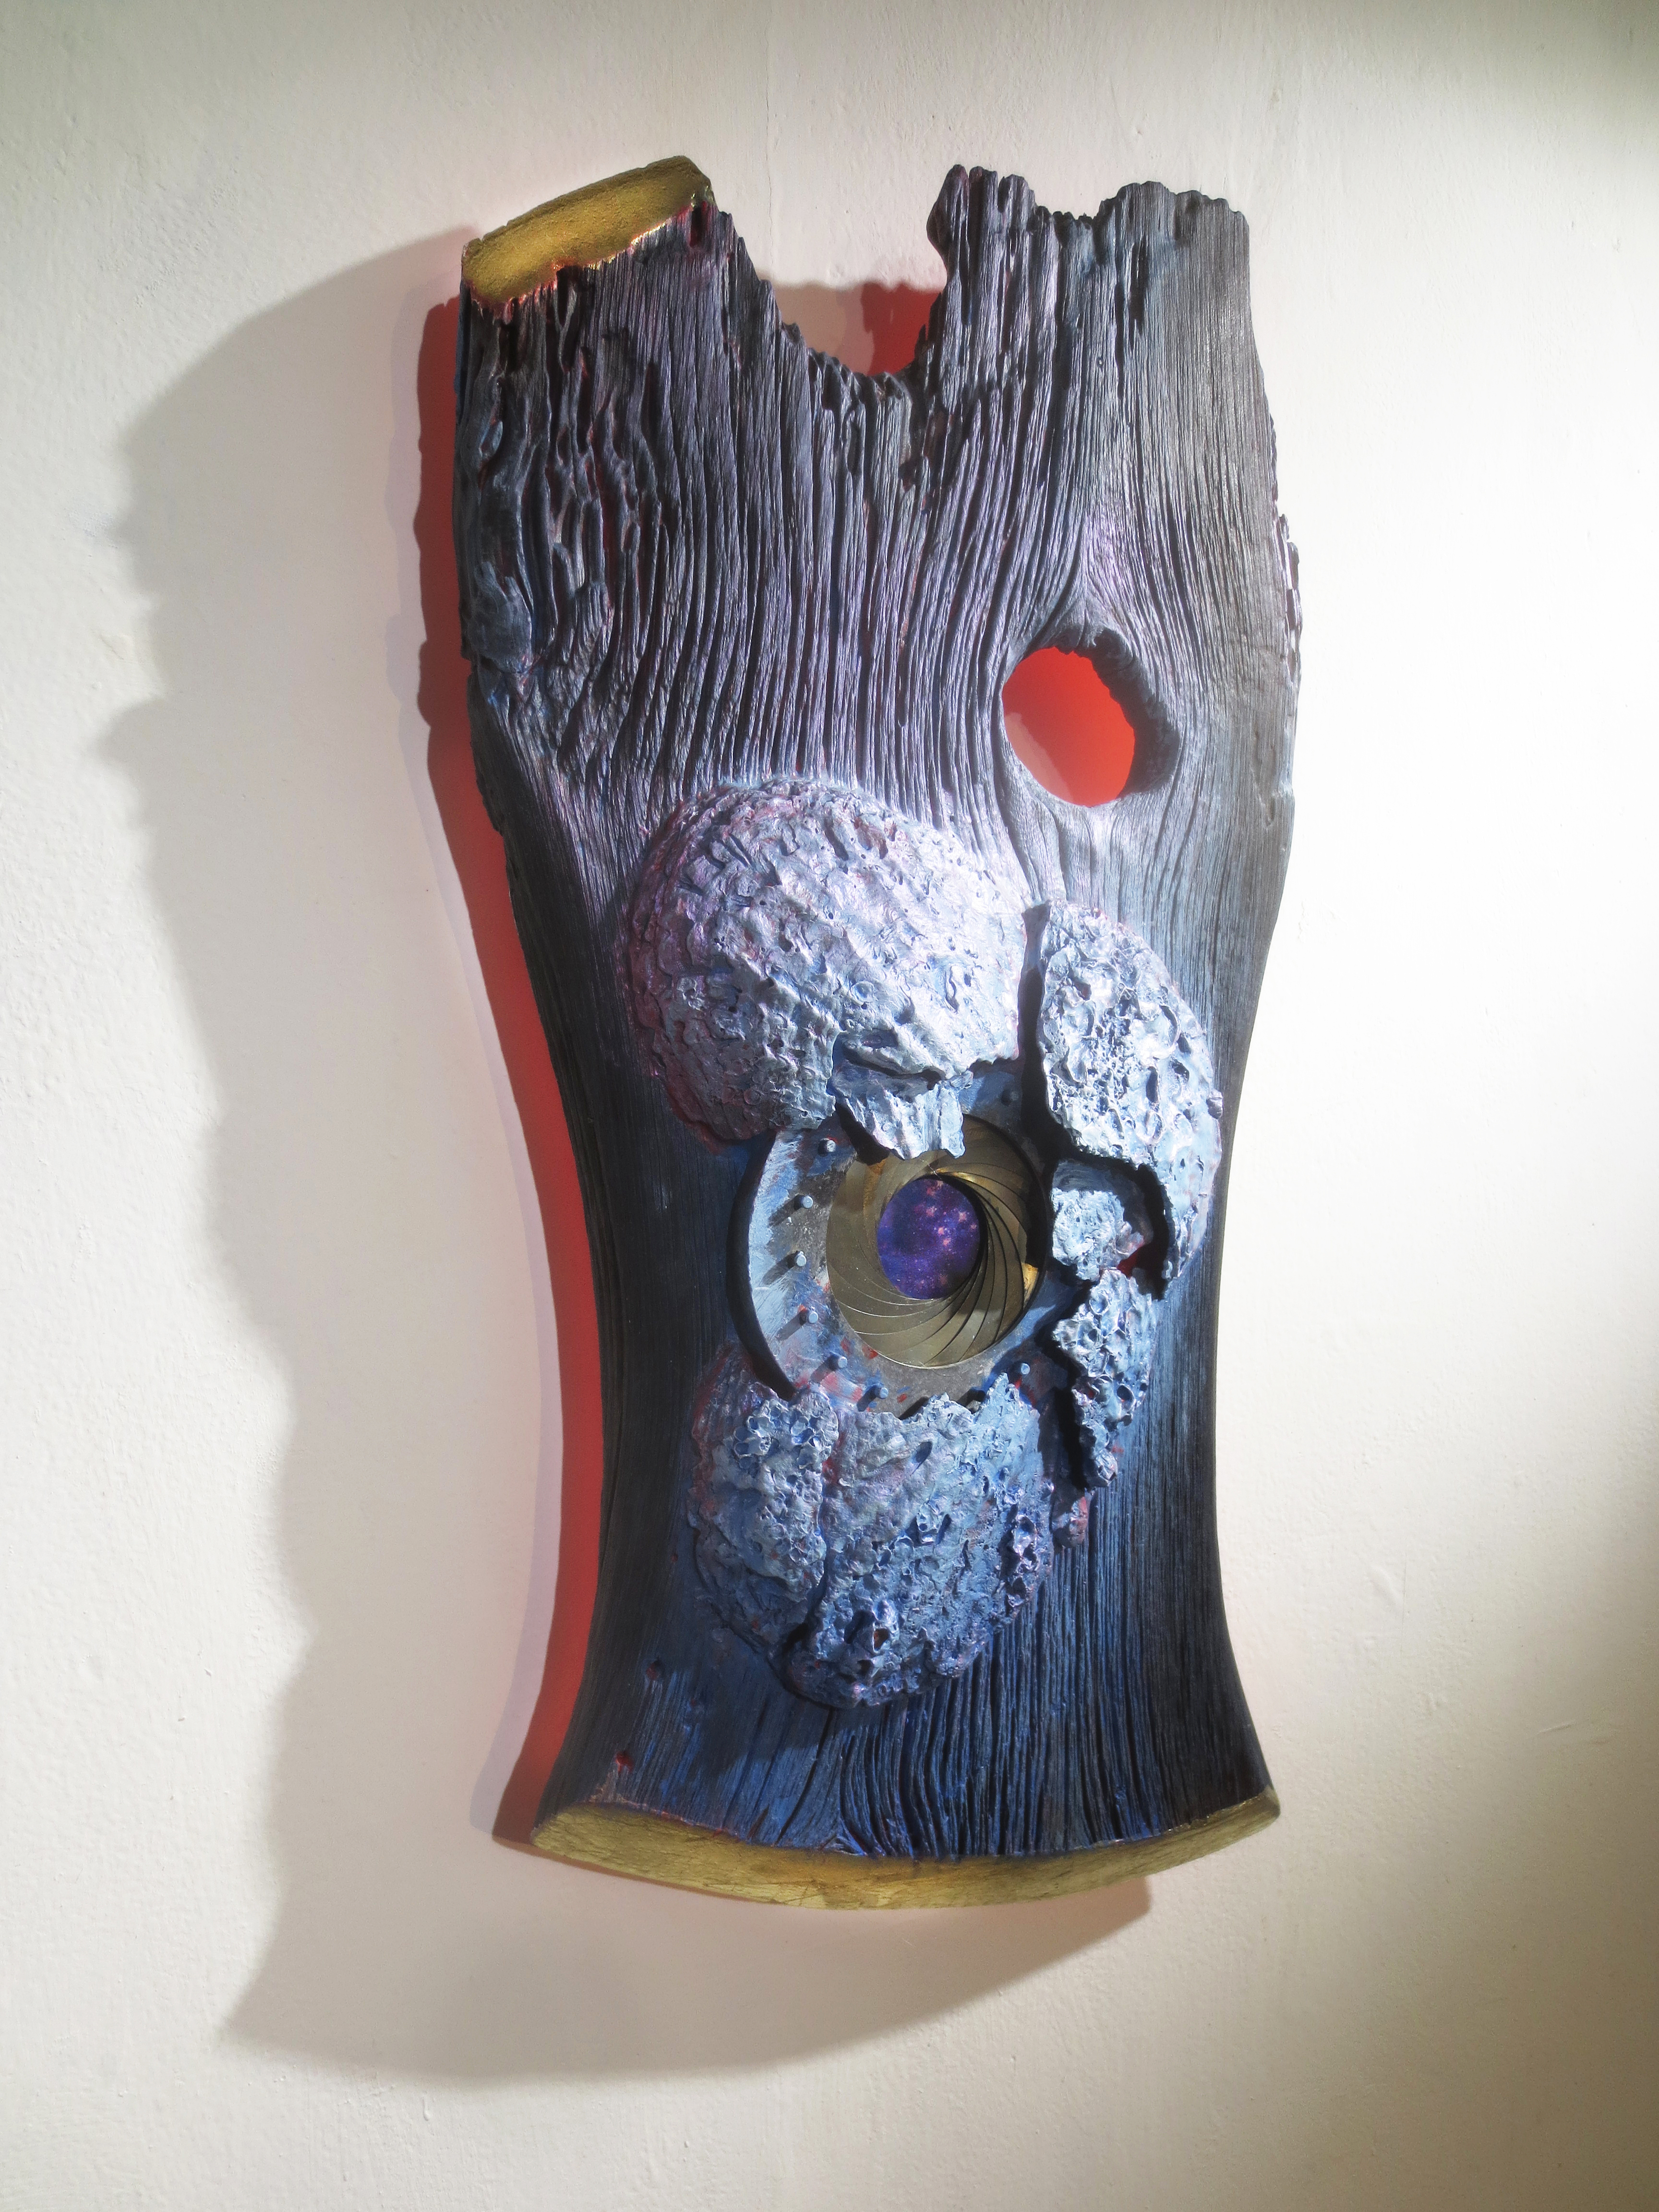 wood, sculpture, assemblage, mixed media, acrylic